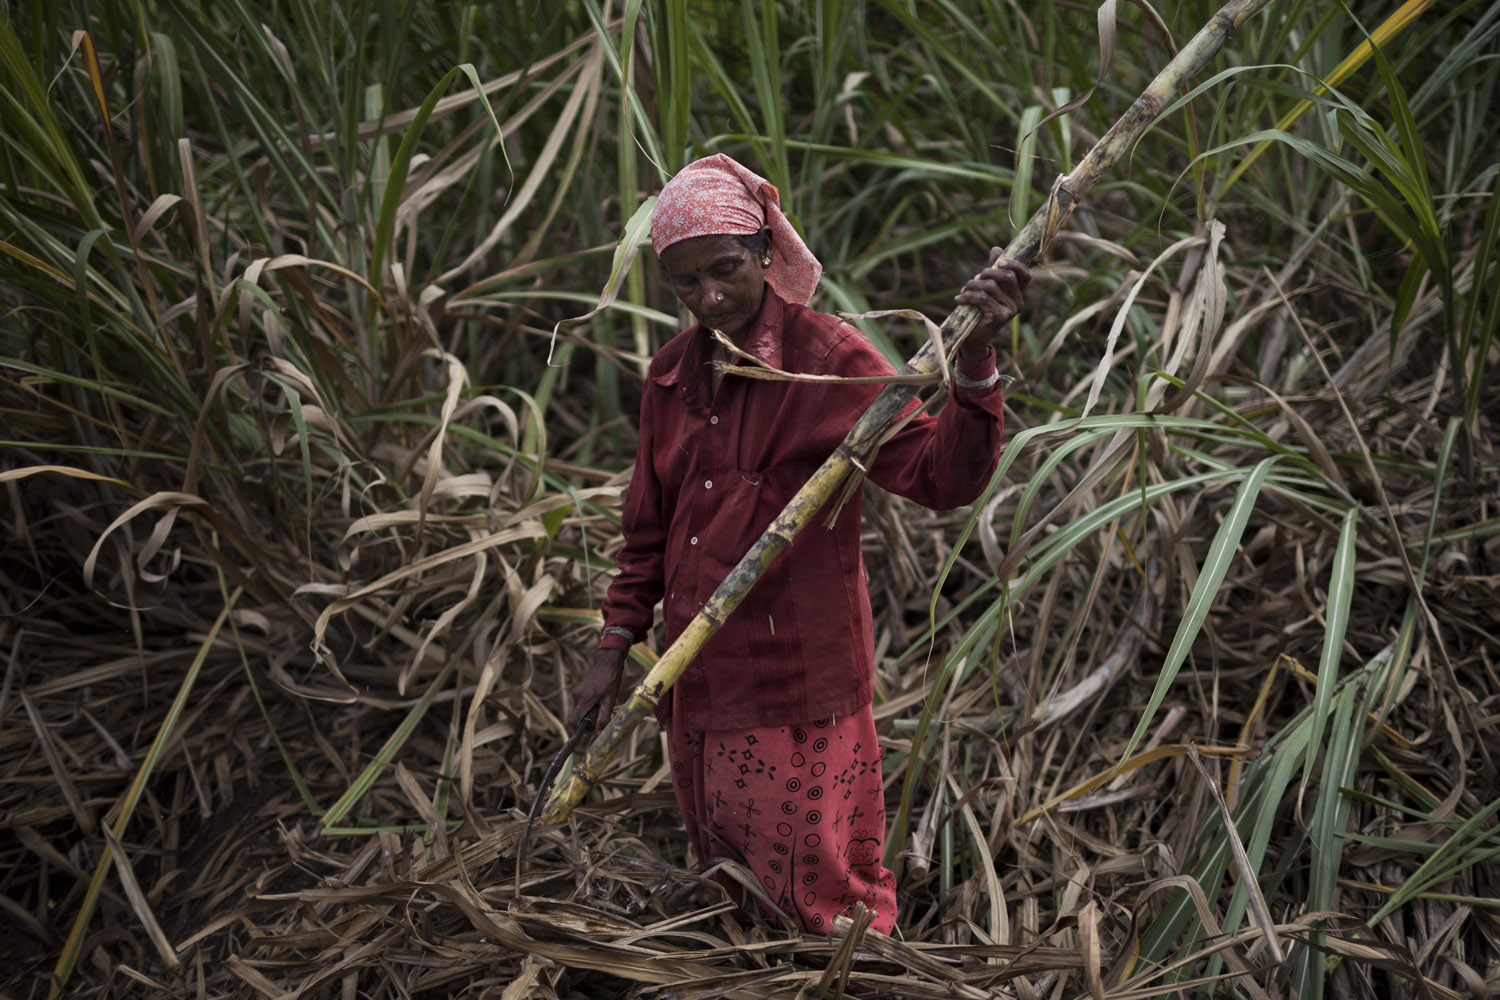 Kamalamma, 55, a daily wage labourer, harvests sugarcane in the village of Madhar Halli. She is paid two rupees, or $0.03, per bundle of sugarcane, and in a day manages to earn 200 rupees, or $3 [Janos Chiala/Al Jazeera]